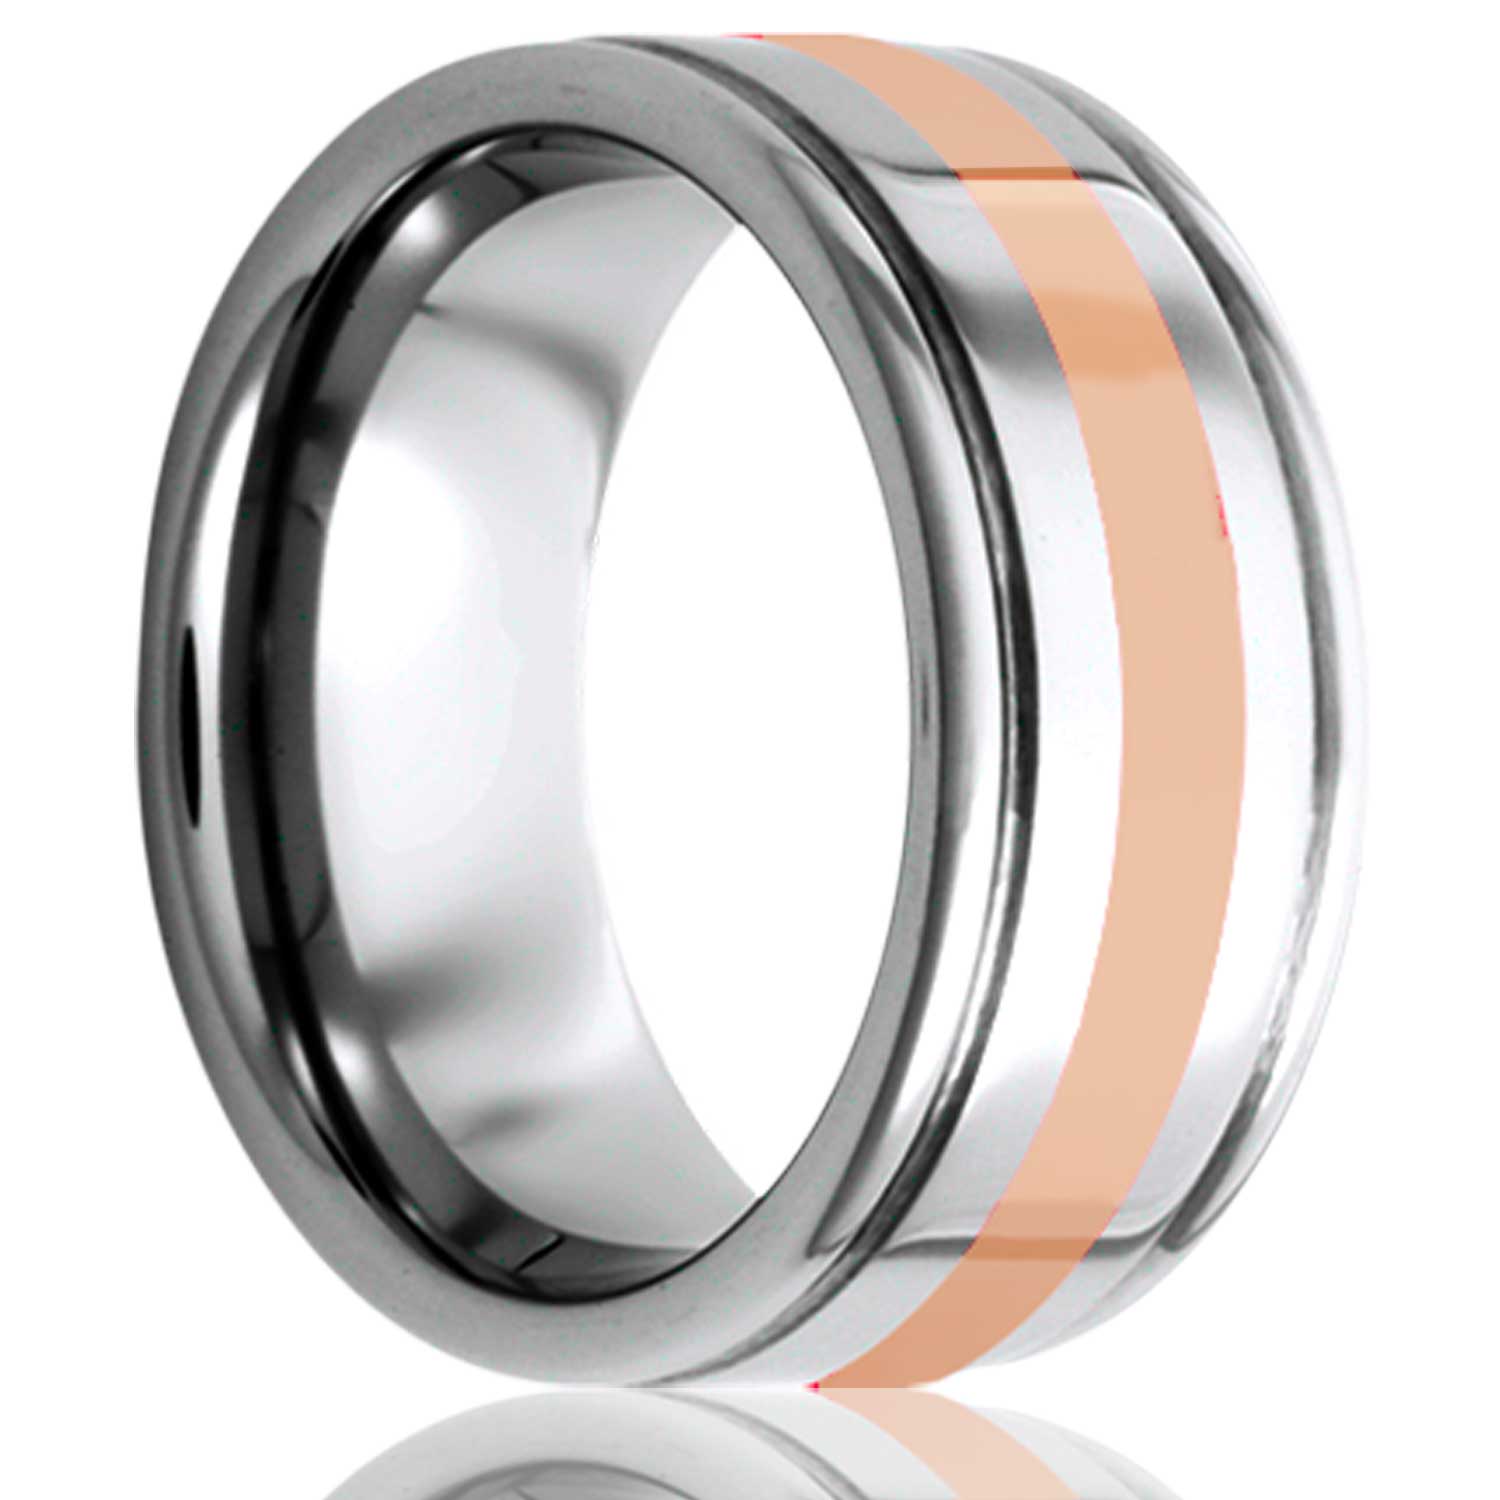 A 14k rose gold inlay grooved tungsten wedding band with grooved edges displayed on a neutral white background.